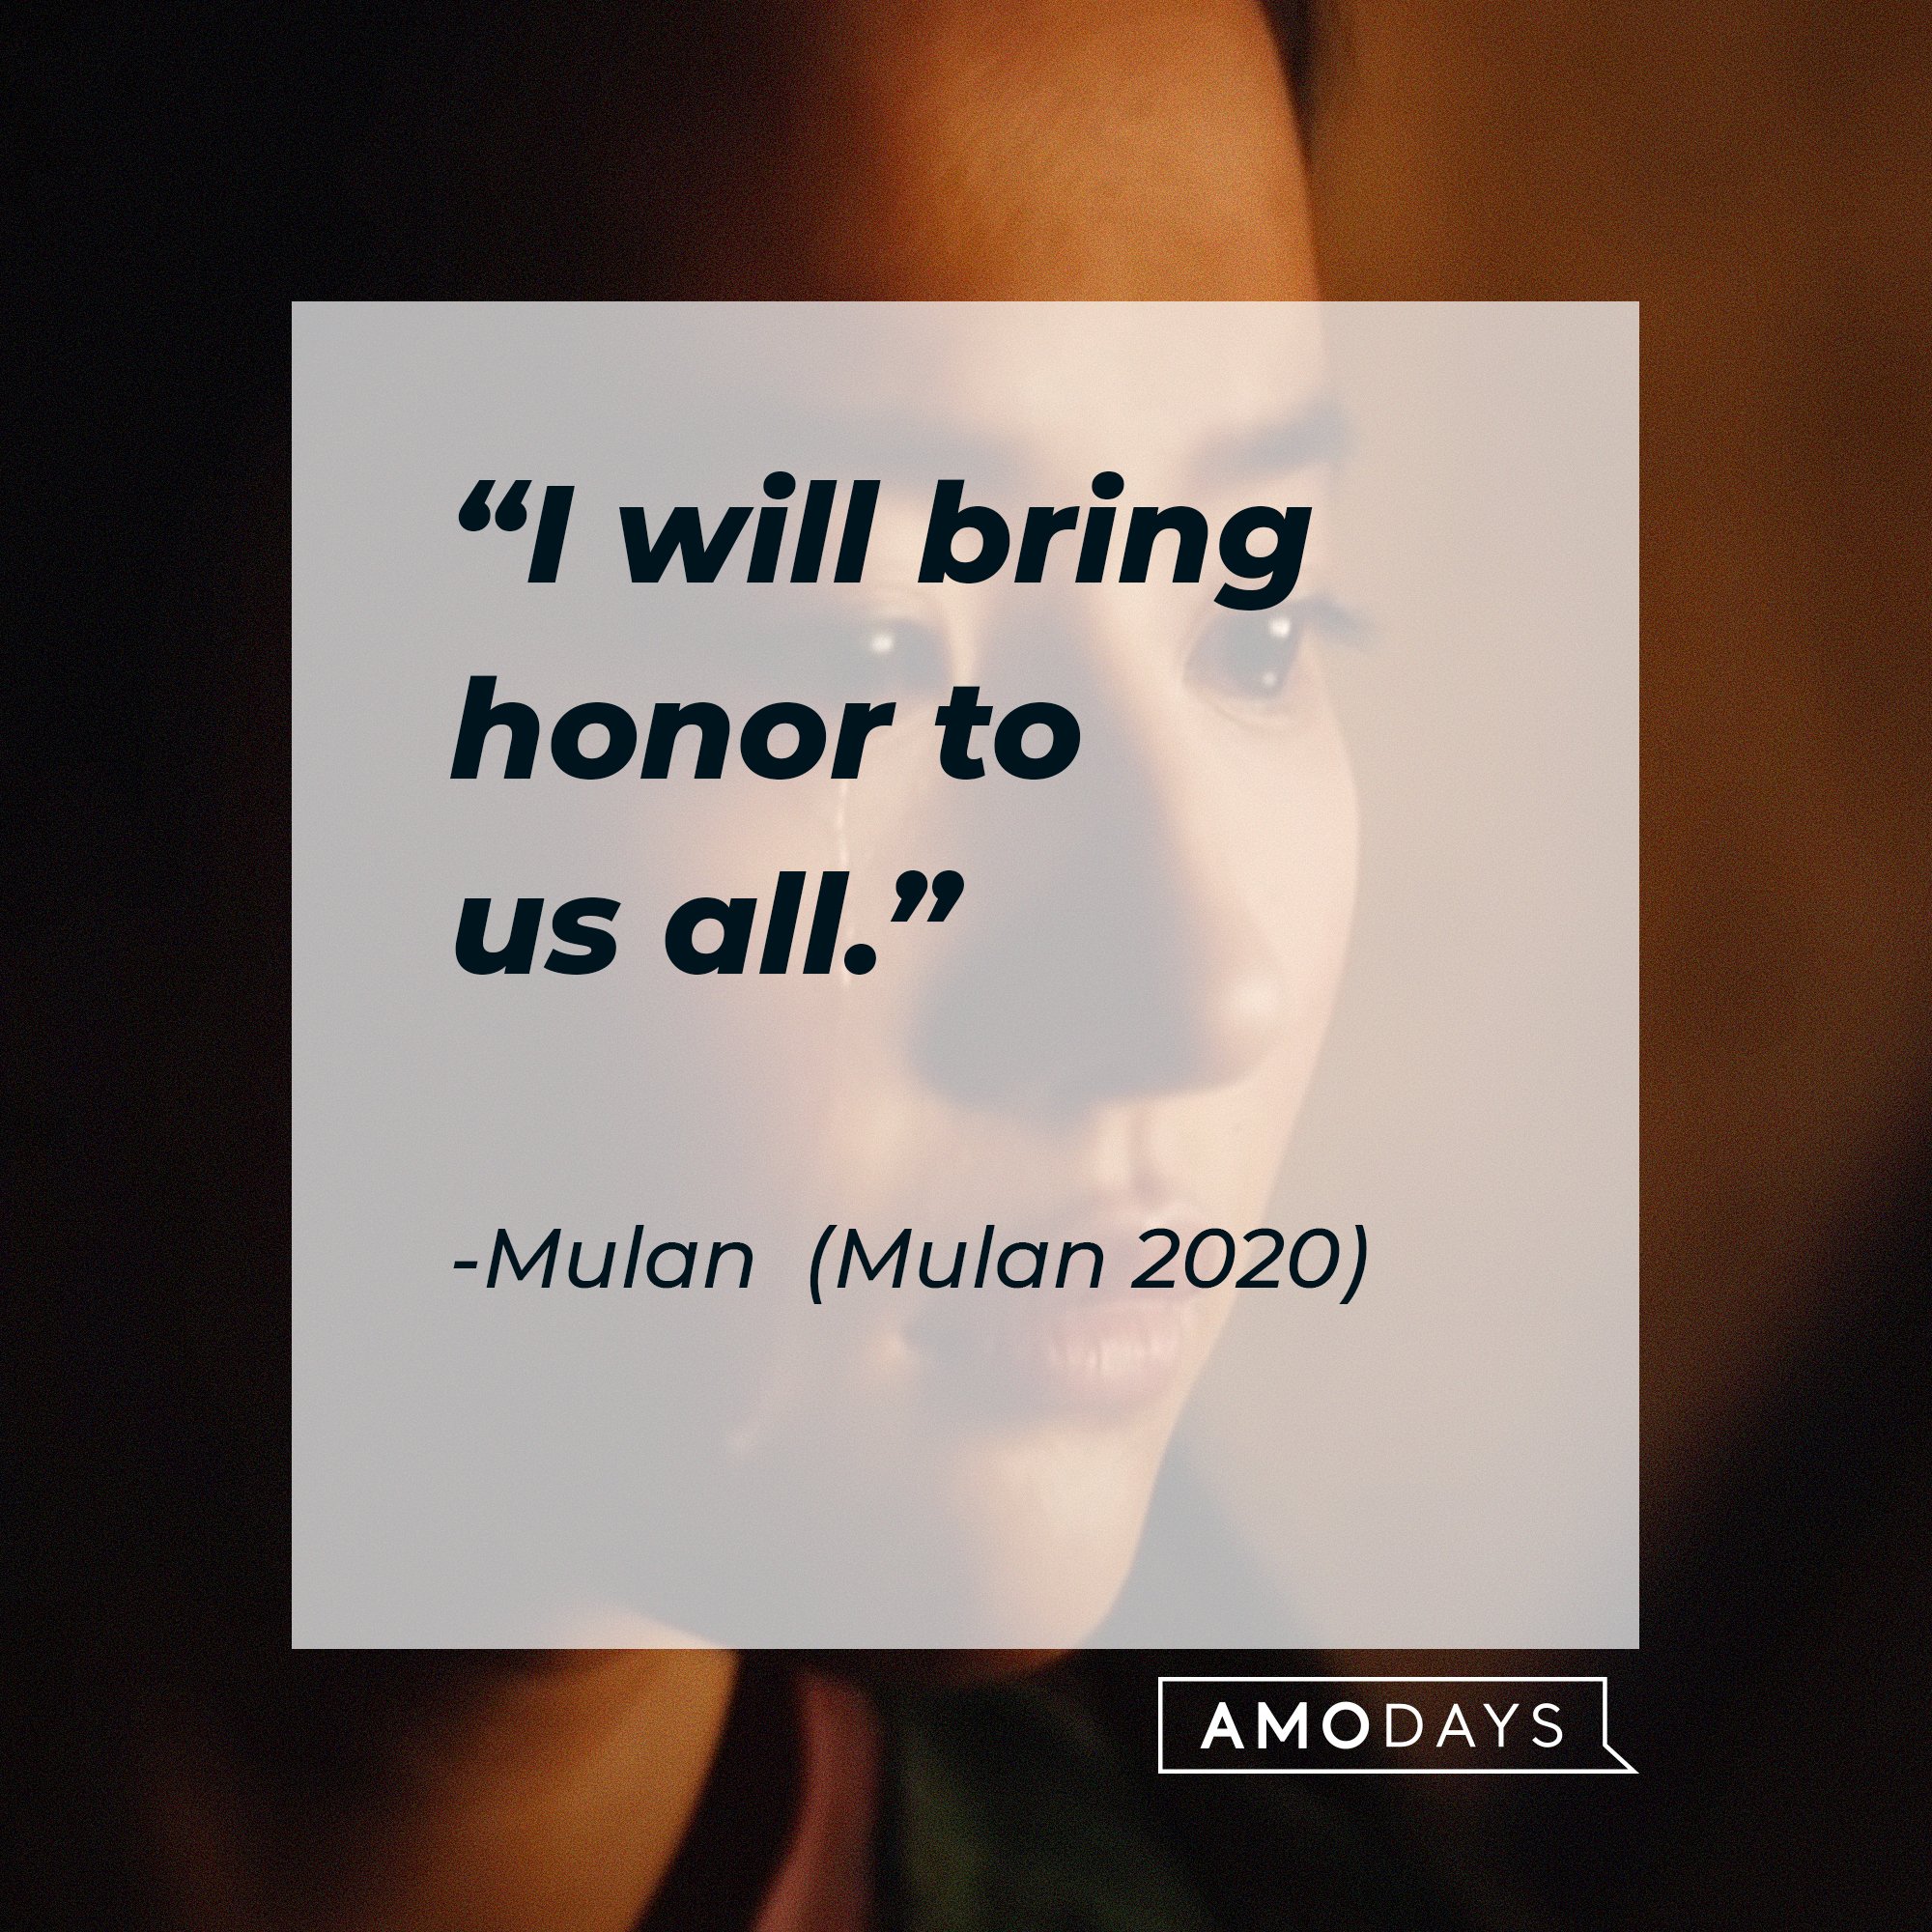 Mulan’s quote: “I will bring honor to us all." | Image: AmoDays